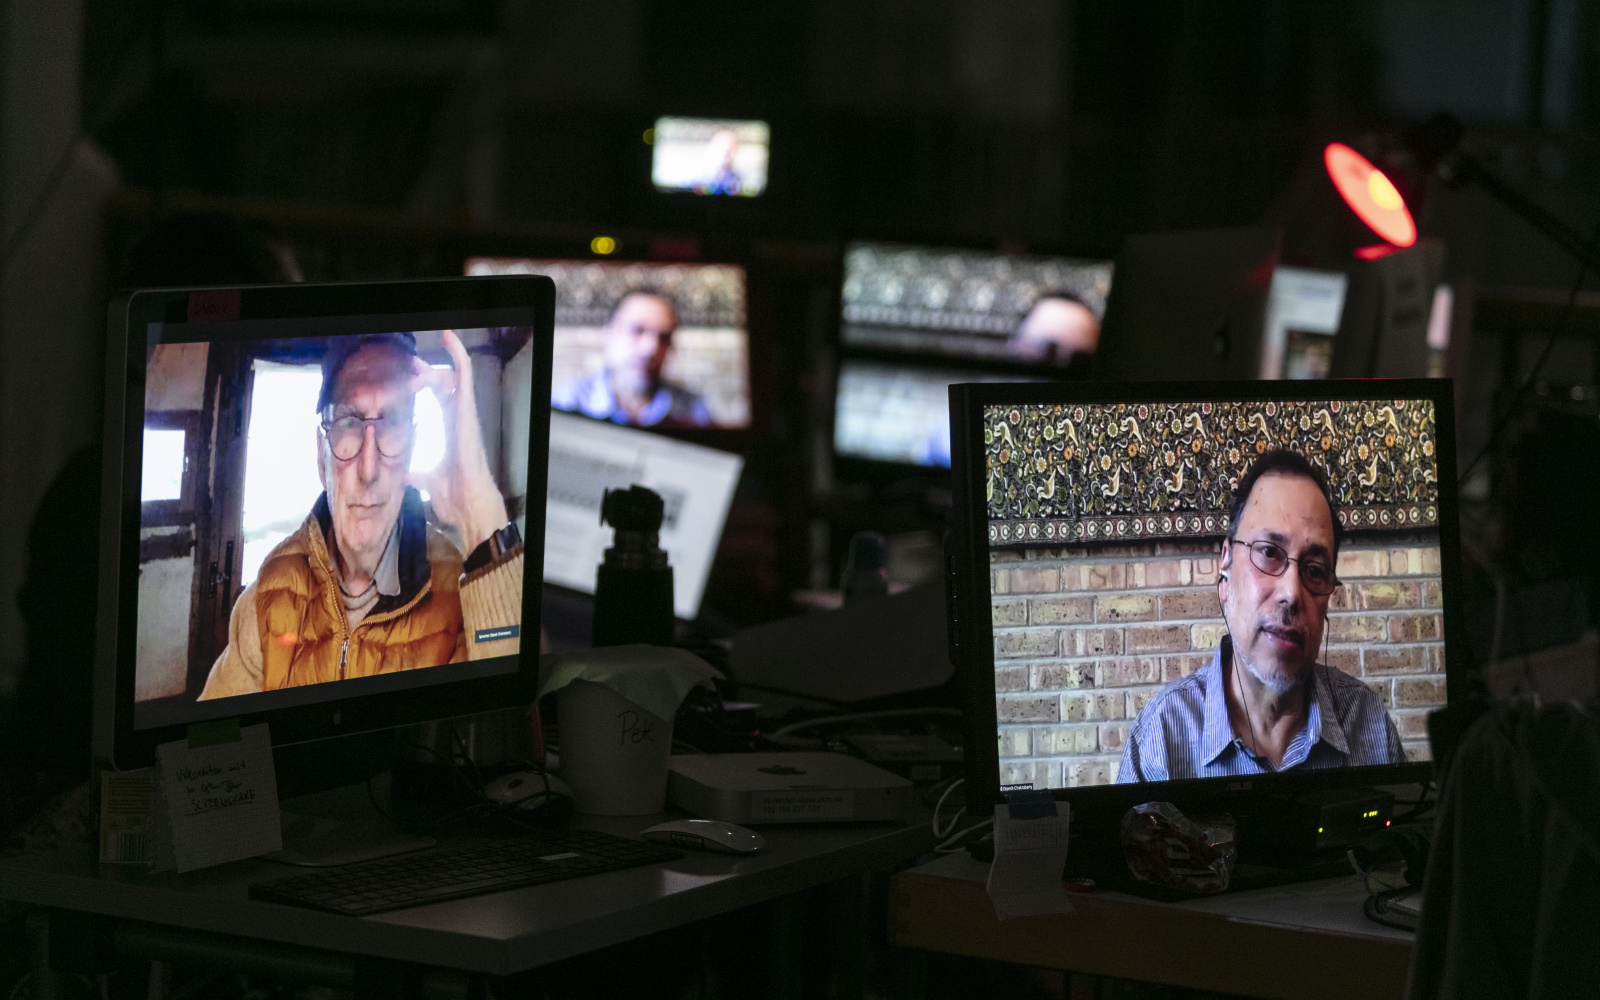 Multiple Mini-Displays show the faces of Bruno Latour and Dipesh Chakrabarty.